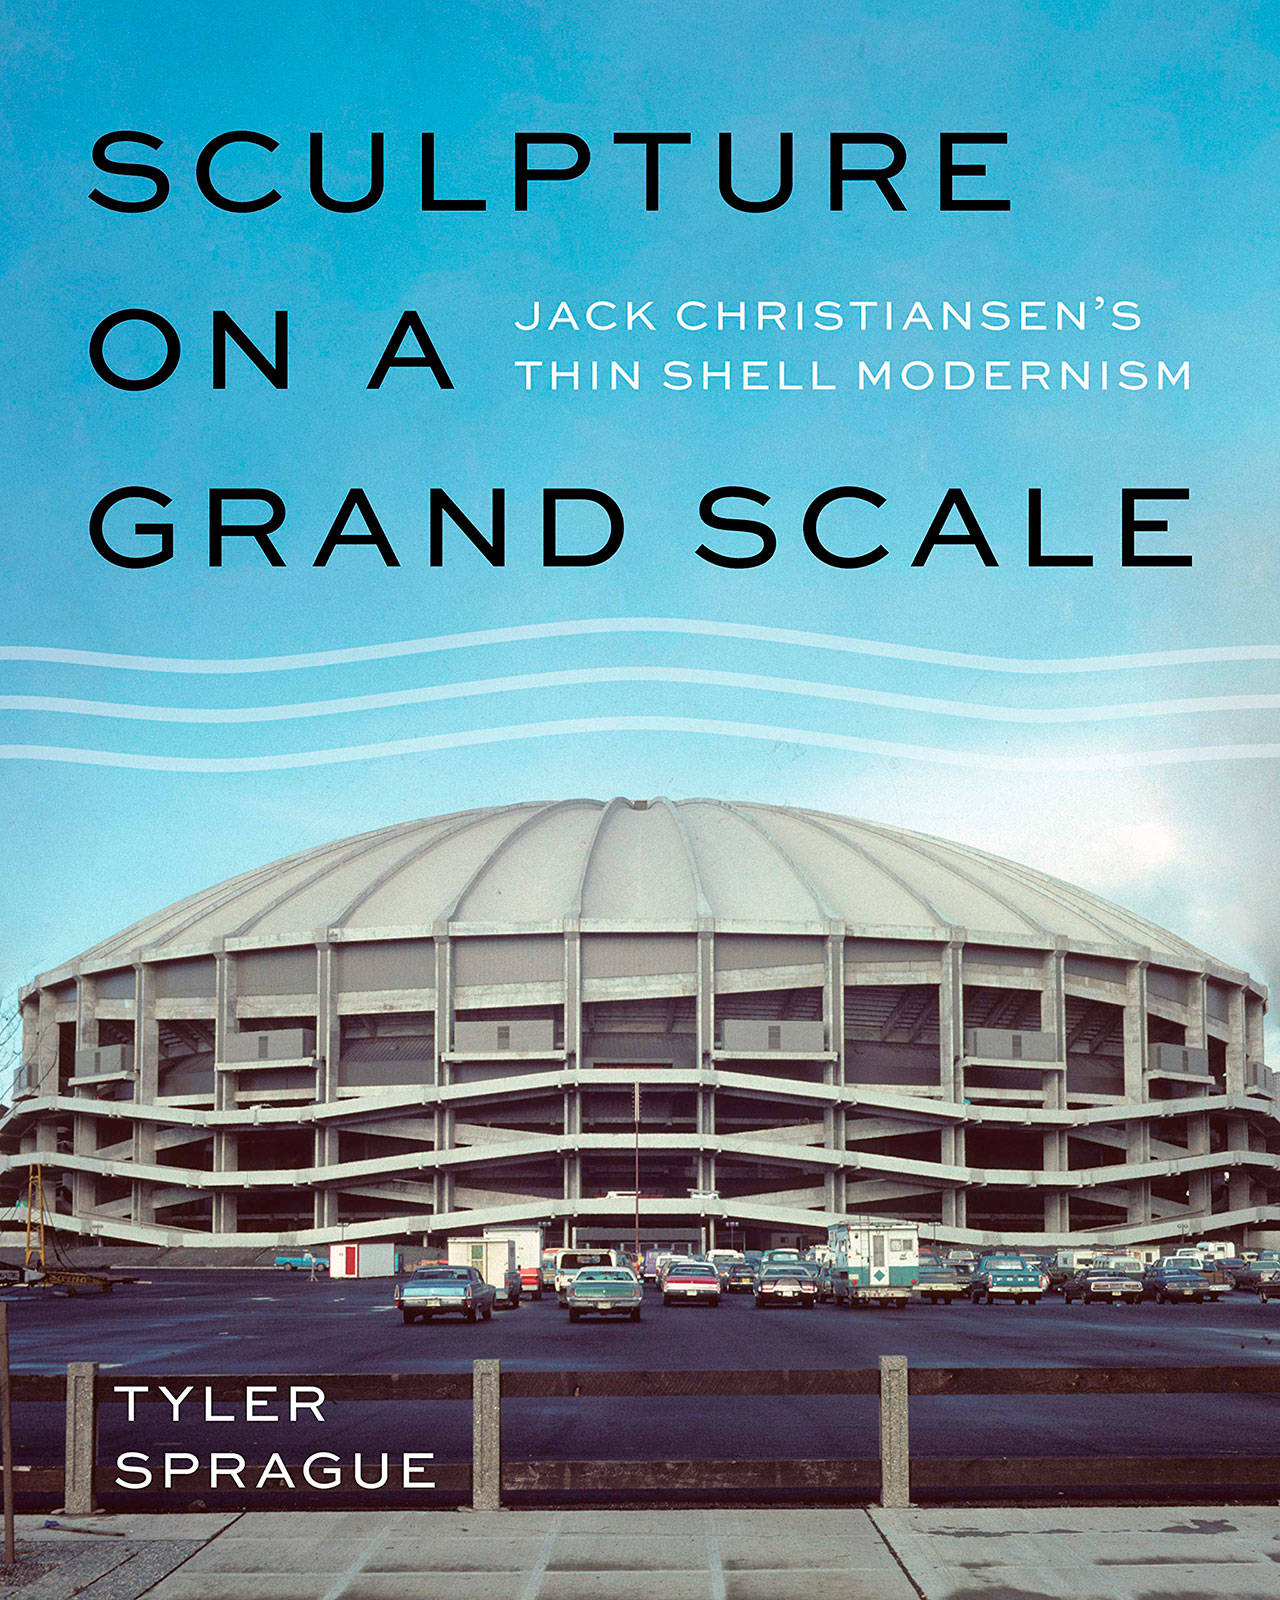 Image courtesy of Eagle Harbor Book Company | Local author and University of Washington professor Tyler Sprague will visit Eagle Harbor Book Company at 3 p.m. Sunday, Feb. 23 to discuss his new book “Sculpture on a Grand Scale: The Thin Shell Modernism of Jack Christiansen.”